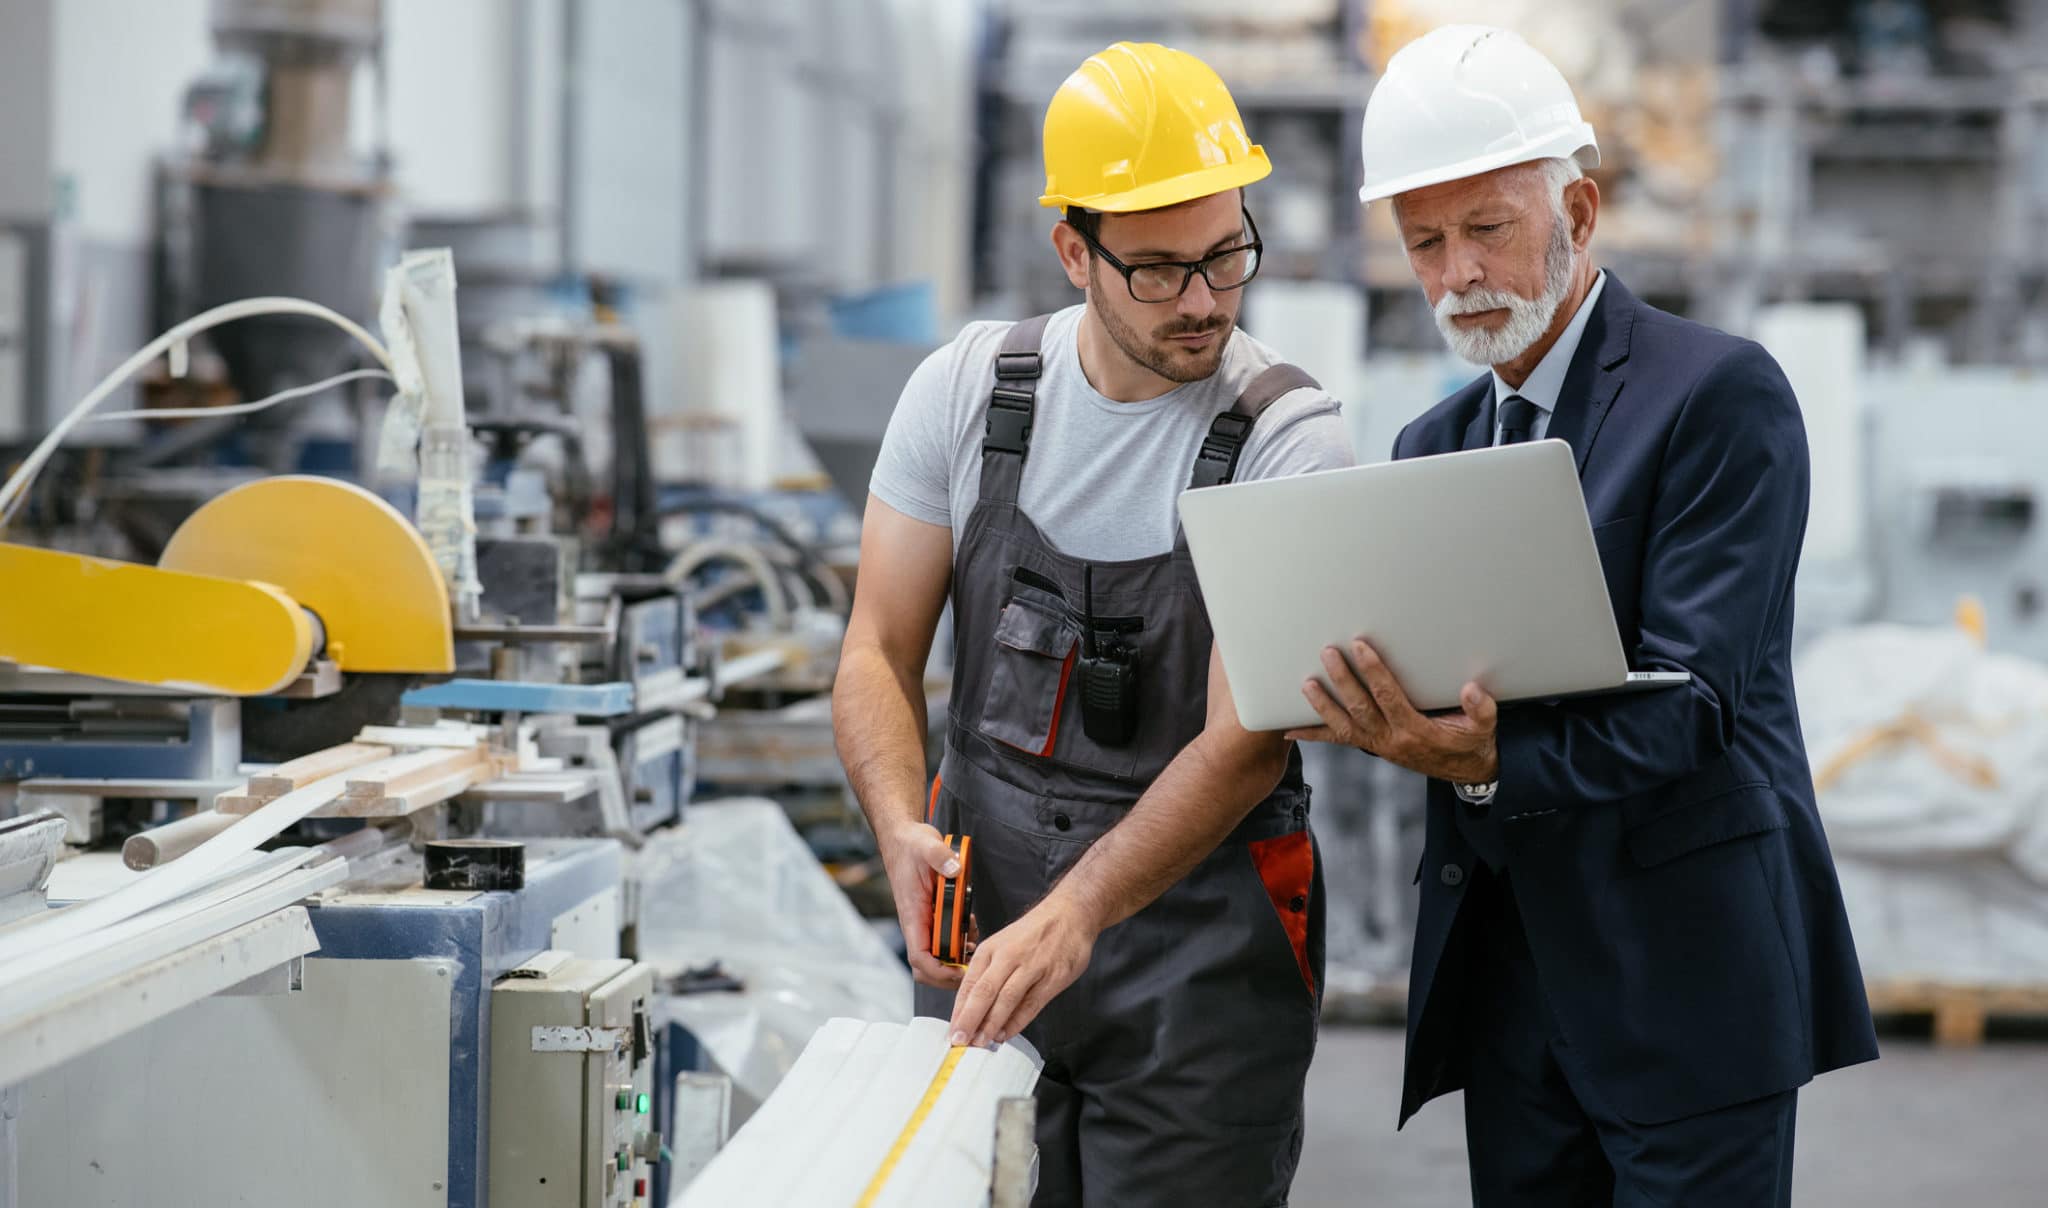 What’s The Importance Of Cybersecurity For Manufacturing Firms?